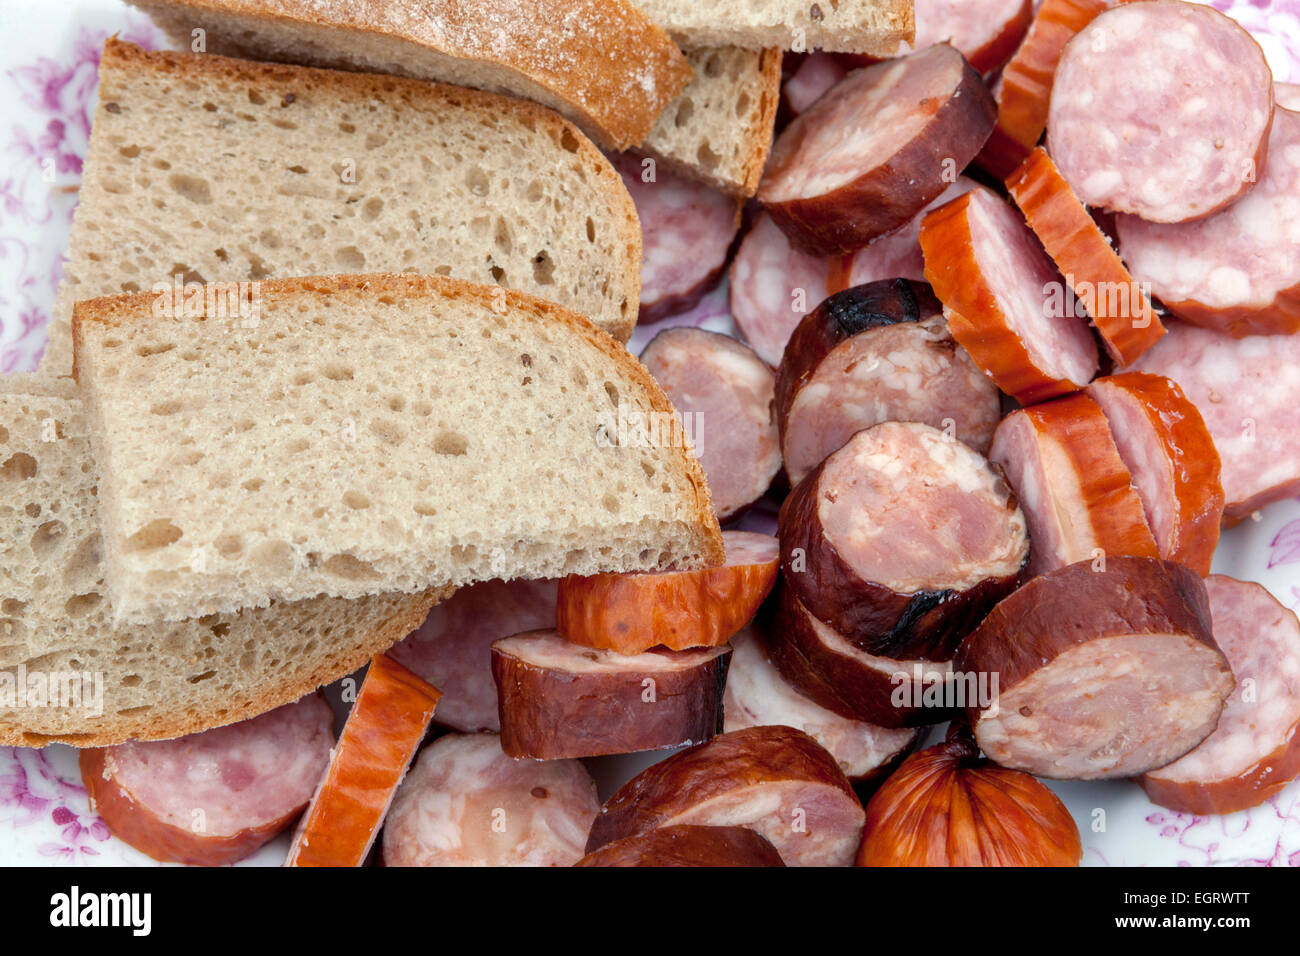 Sliced bread and salami Stock Photo